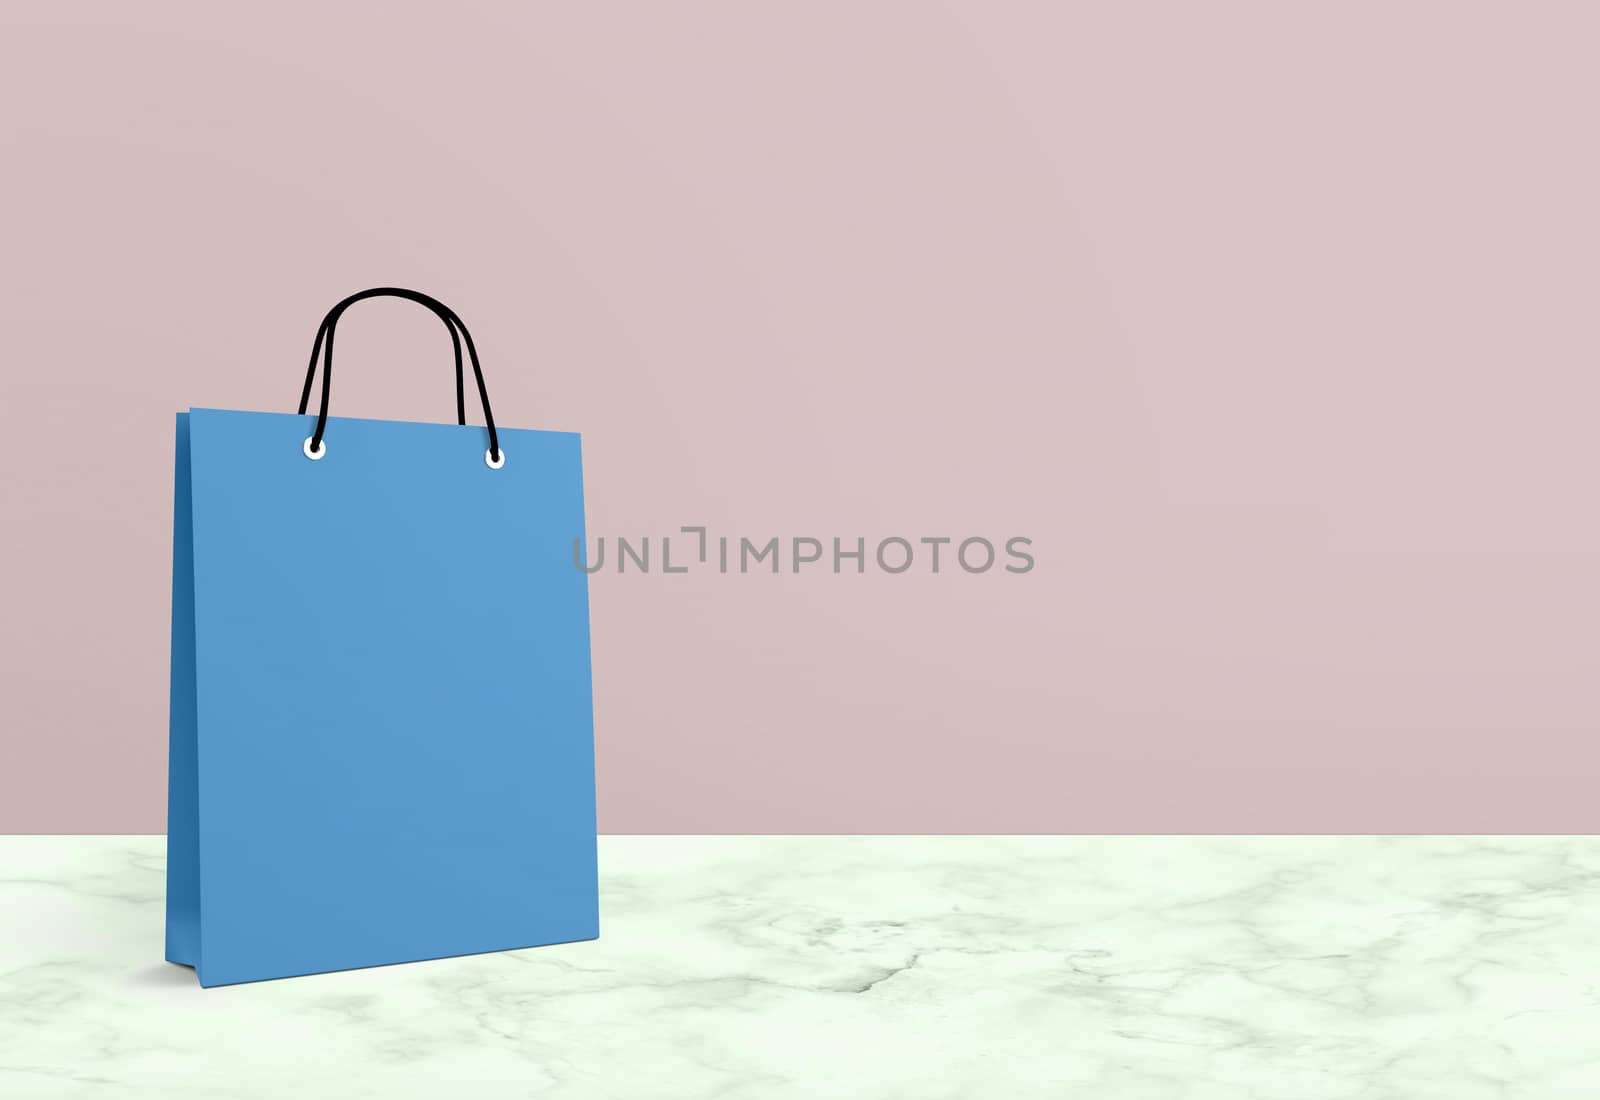 blue paper bag for shopping on a pink background by boys1983@mail.ru